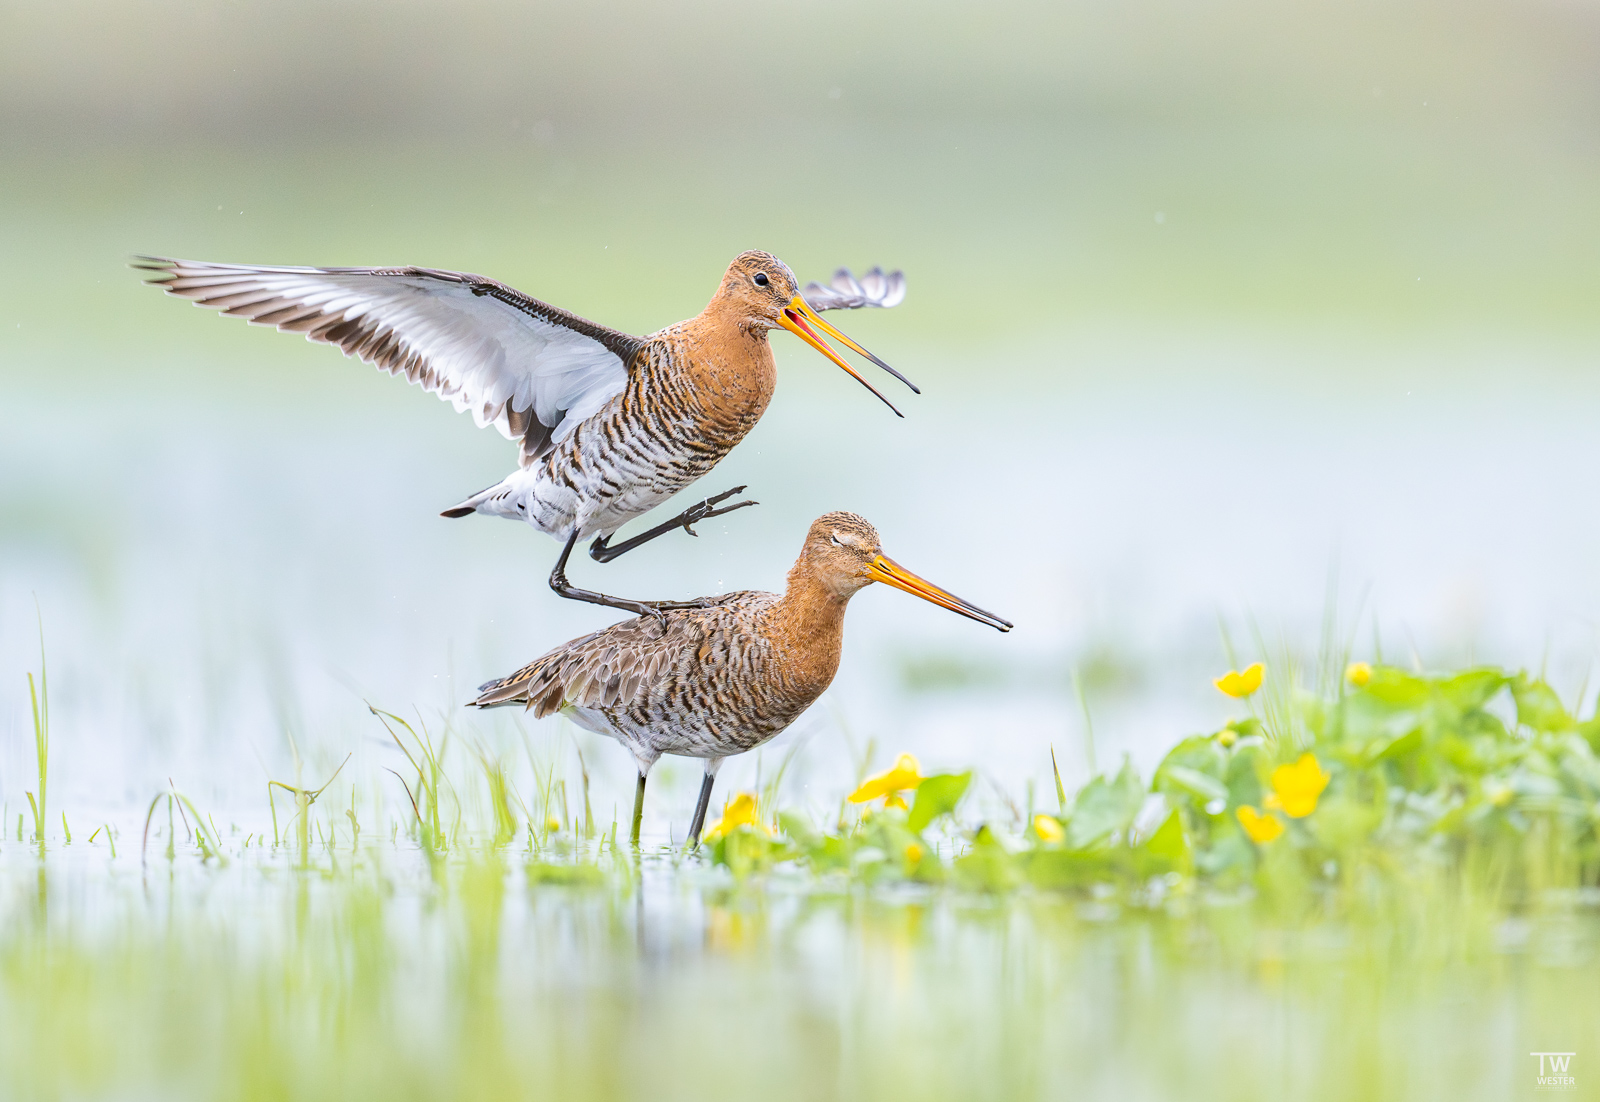 In the land of the black-tailed godwit